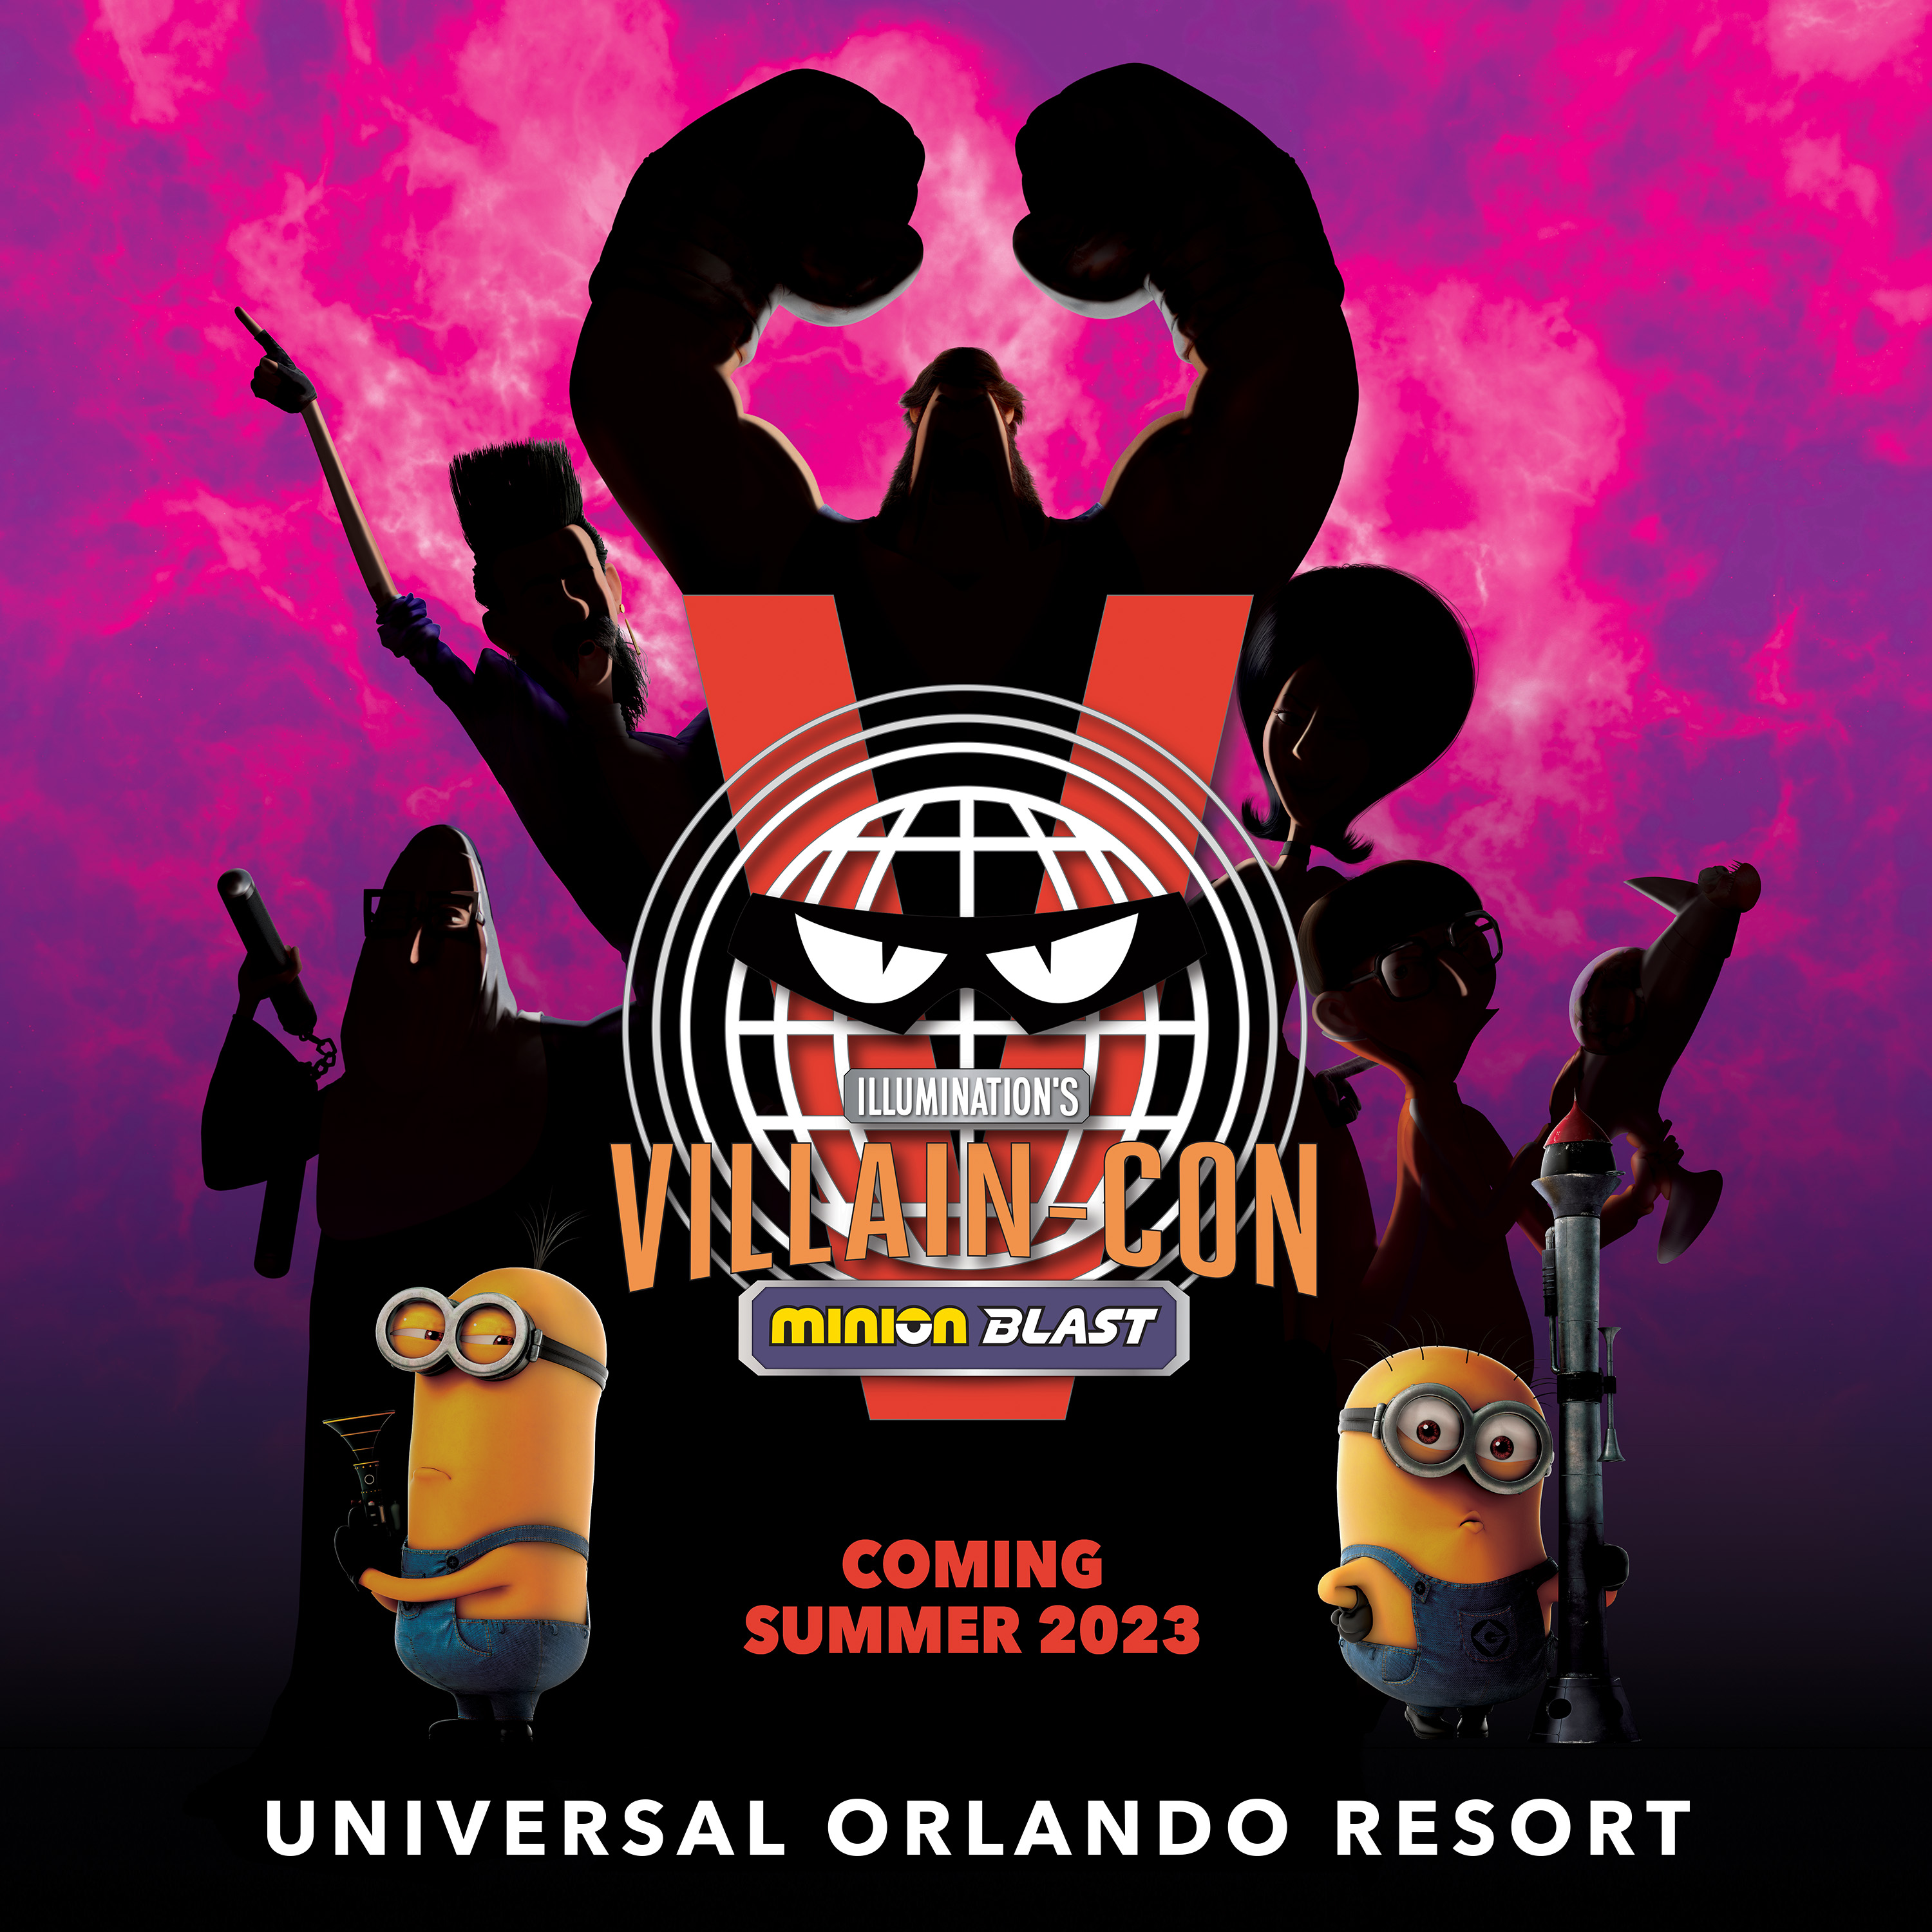 It’s So Much Fun It’s a Crime… Universal Orlando Resort Announces Illumination’s Villain-Con Minion Blast – A First-of-its-kind Diabolical Family Attraction Inspired by Illumination’s Popular Minions Franchise – Coming to Universal Studios Florida in Summer 2023